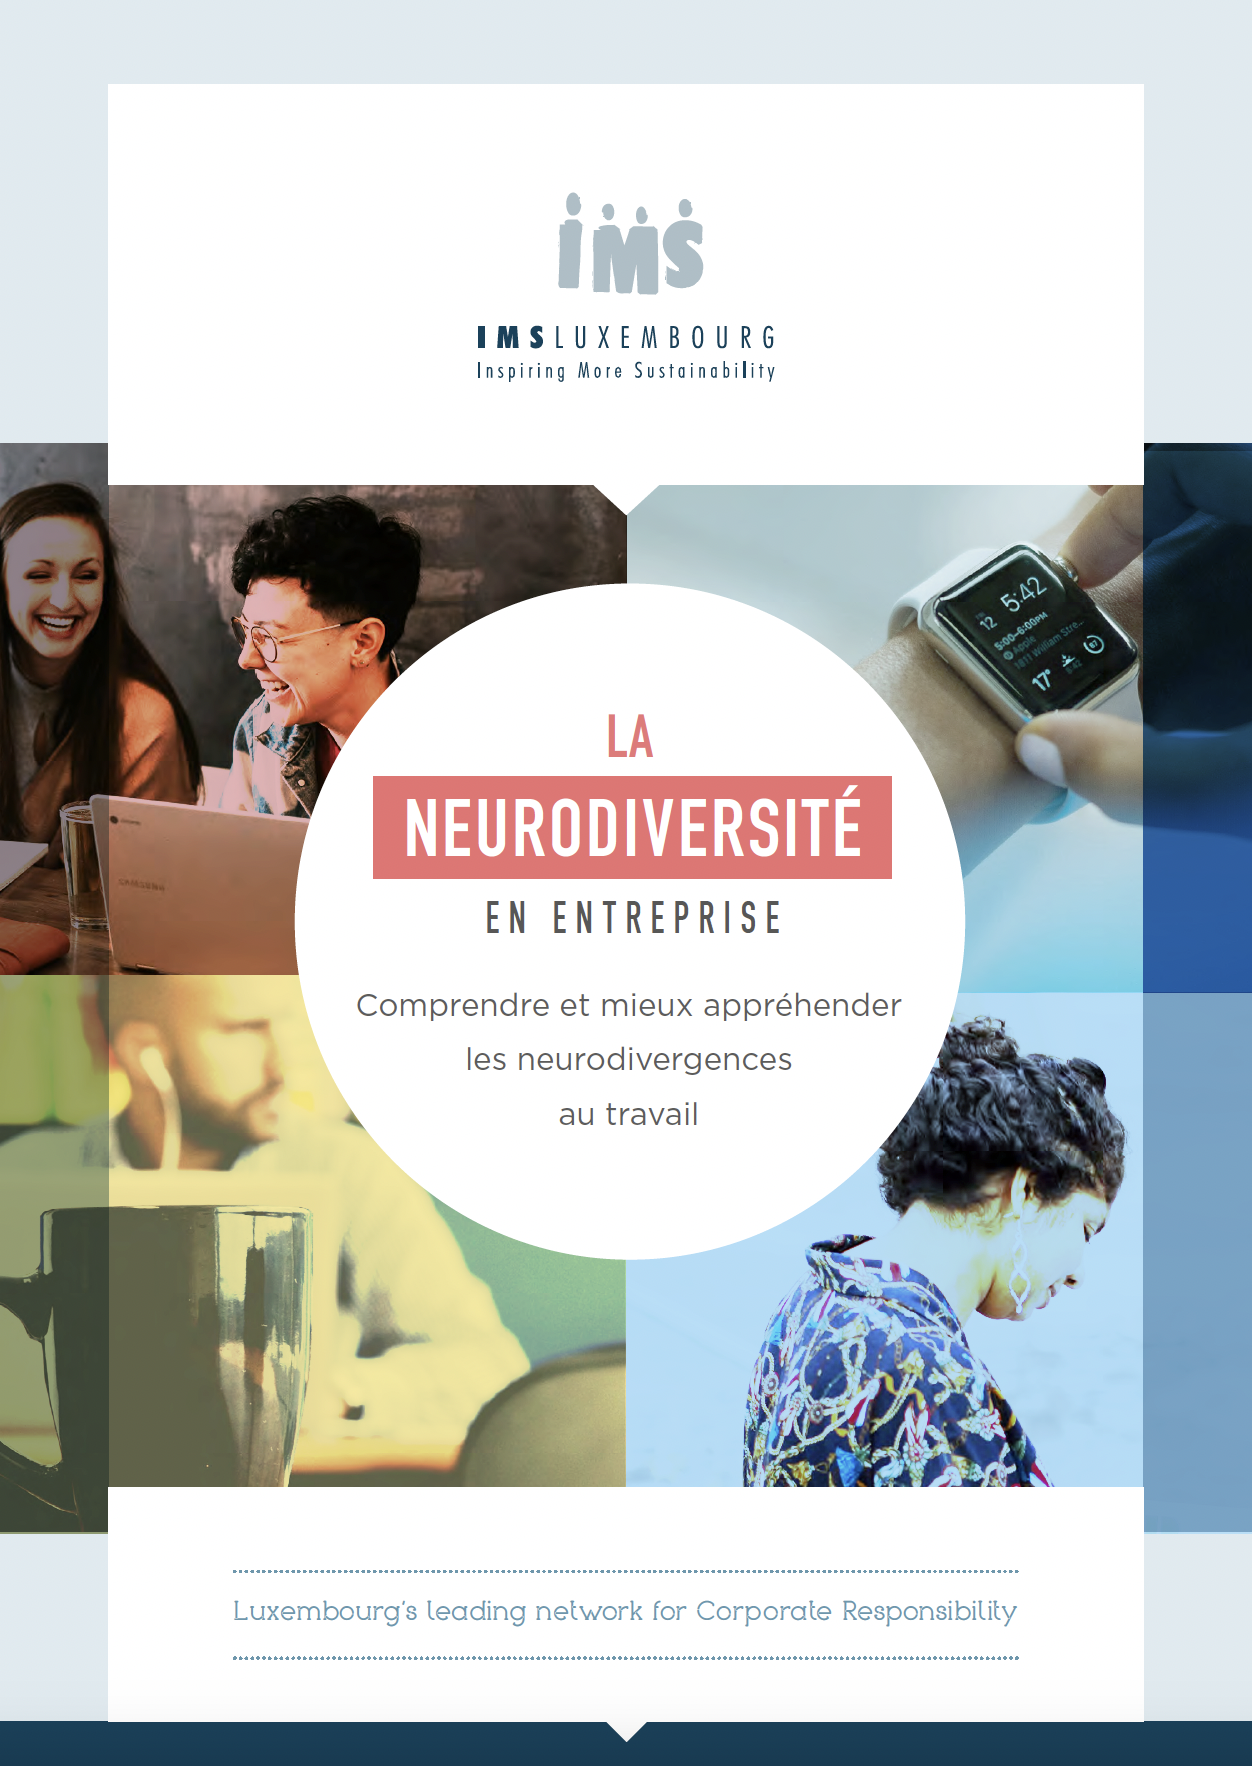 Neurodiversity: Understanding and dealing with neurodivergences in the workplace